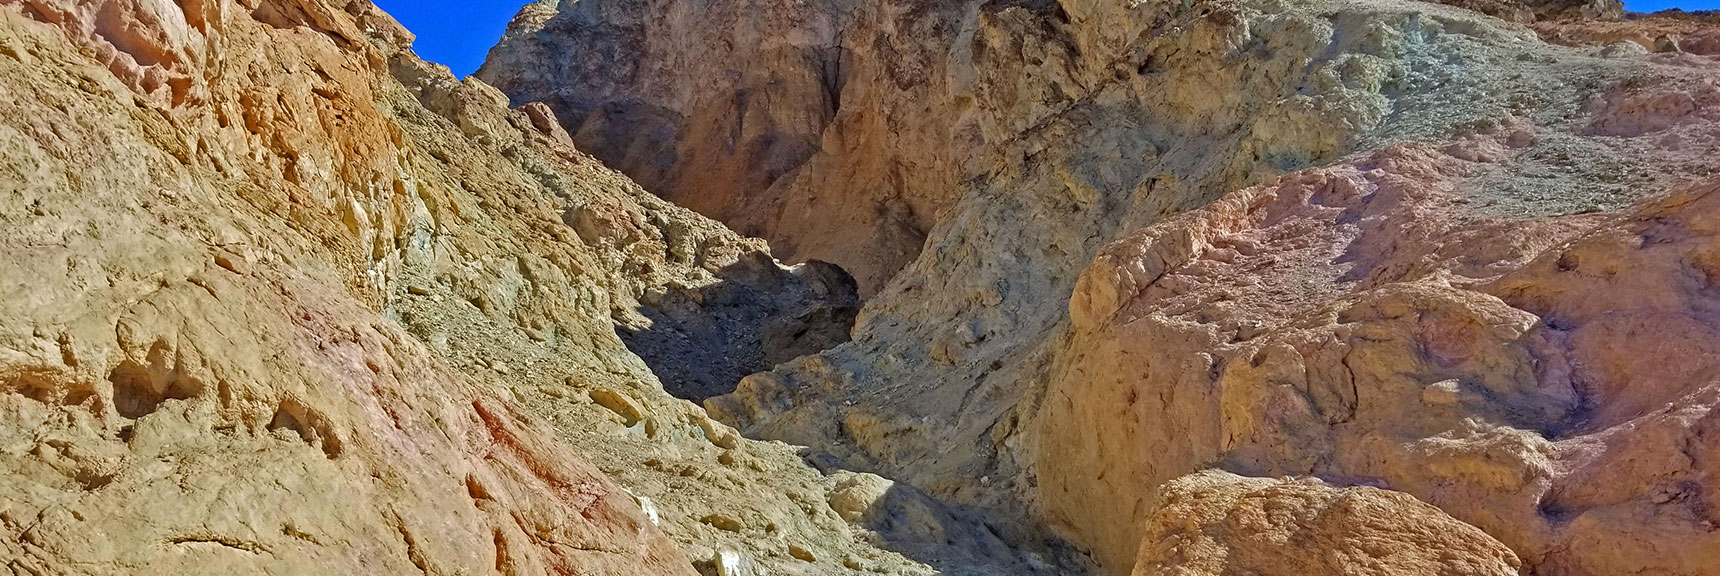 View Up 2nd Dip Canyon from Top of Dry Waterfall Bypass | Artists Drive Hidden Canyon Hikes | Death Valley National Park, California